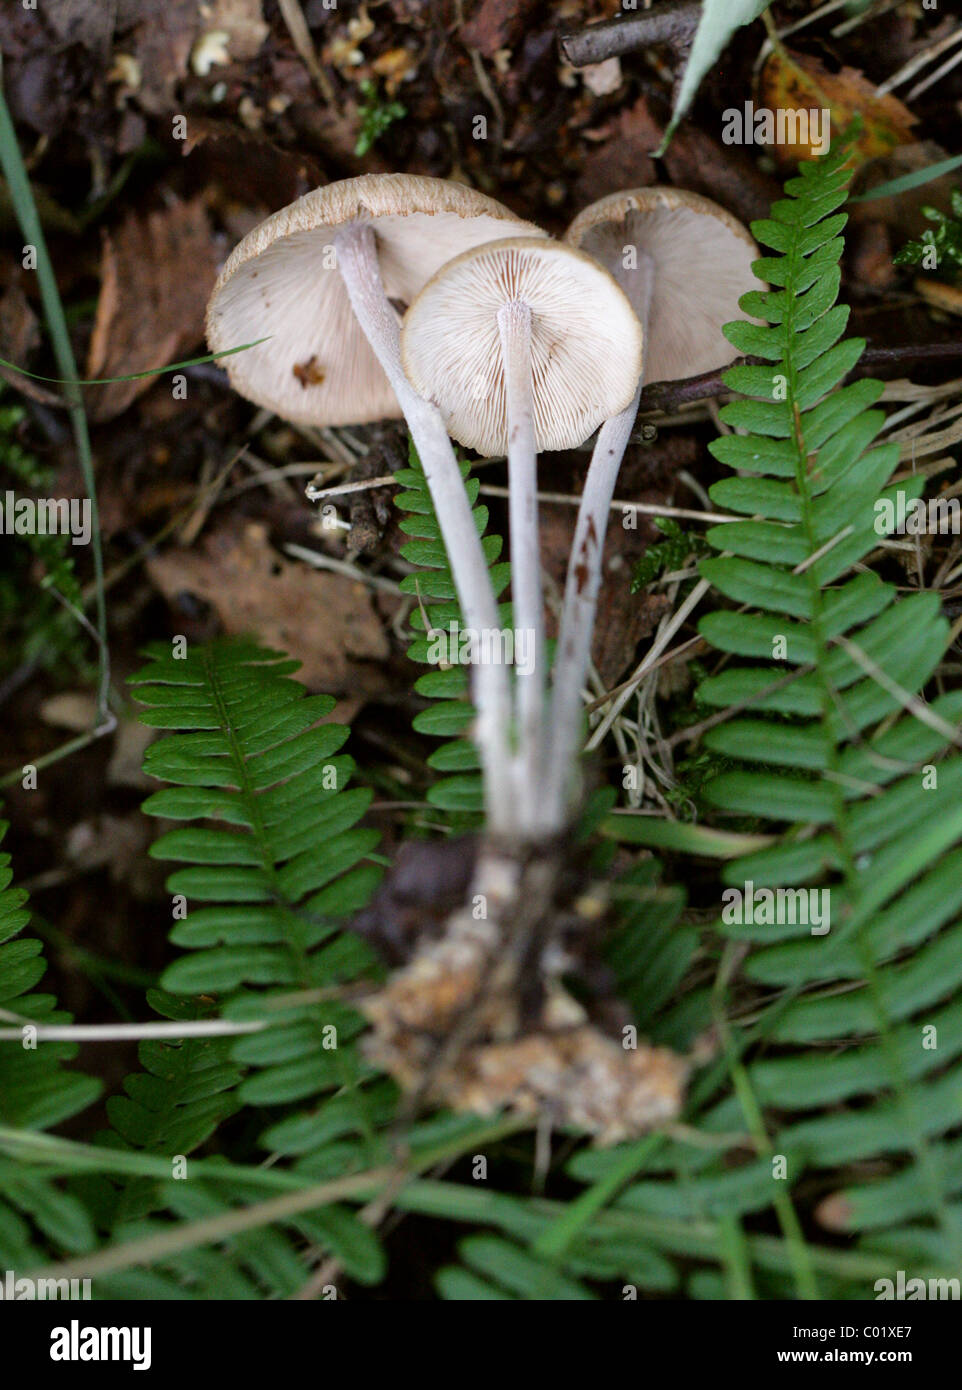 Clustered Toughshank, Gymnopus confluens (Syn.Collybia confluens  Marasmius confluens), Marasmiaceae (Former Tricholomataceae). Stock Photo